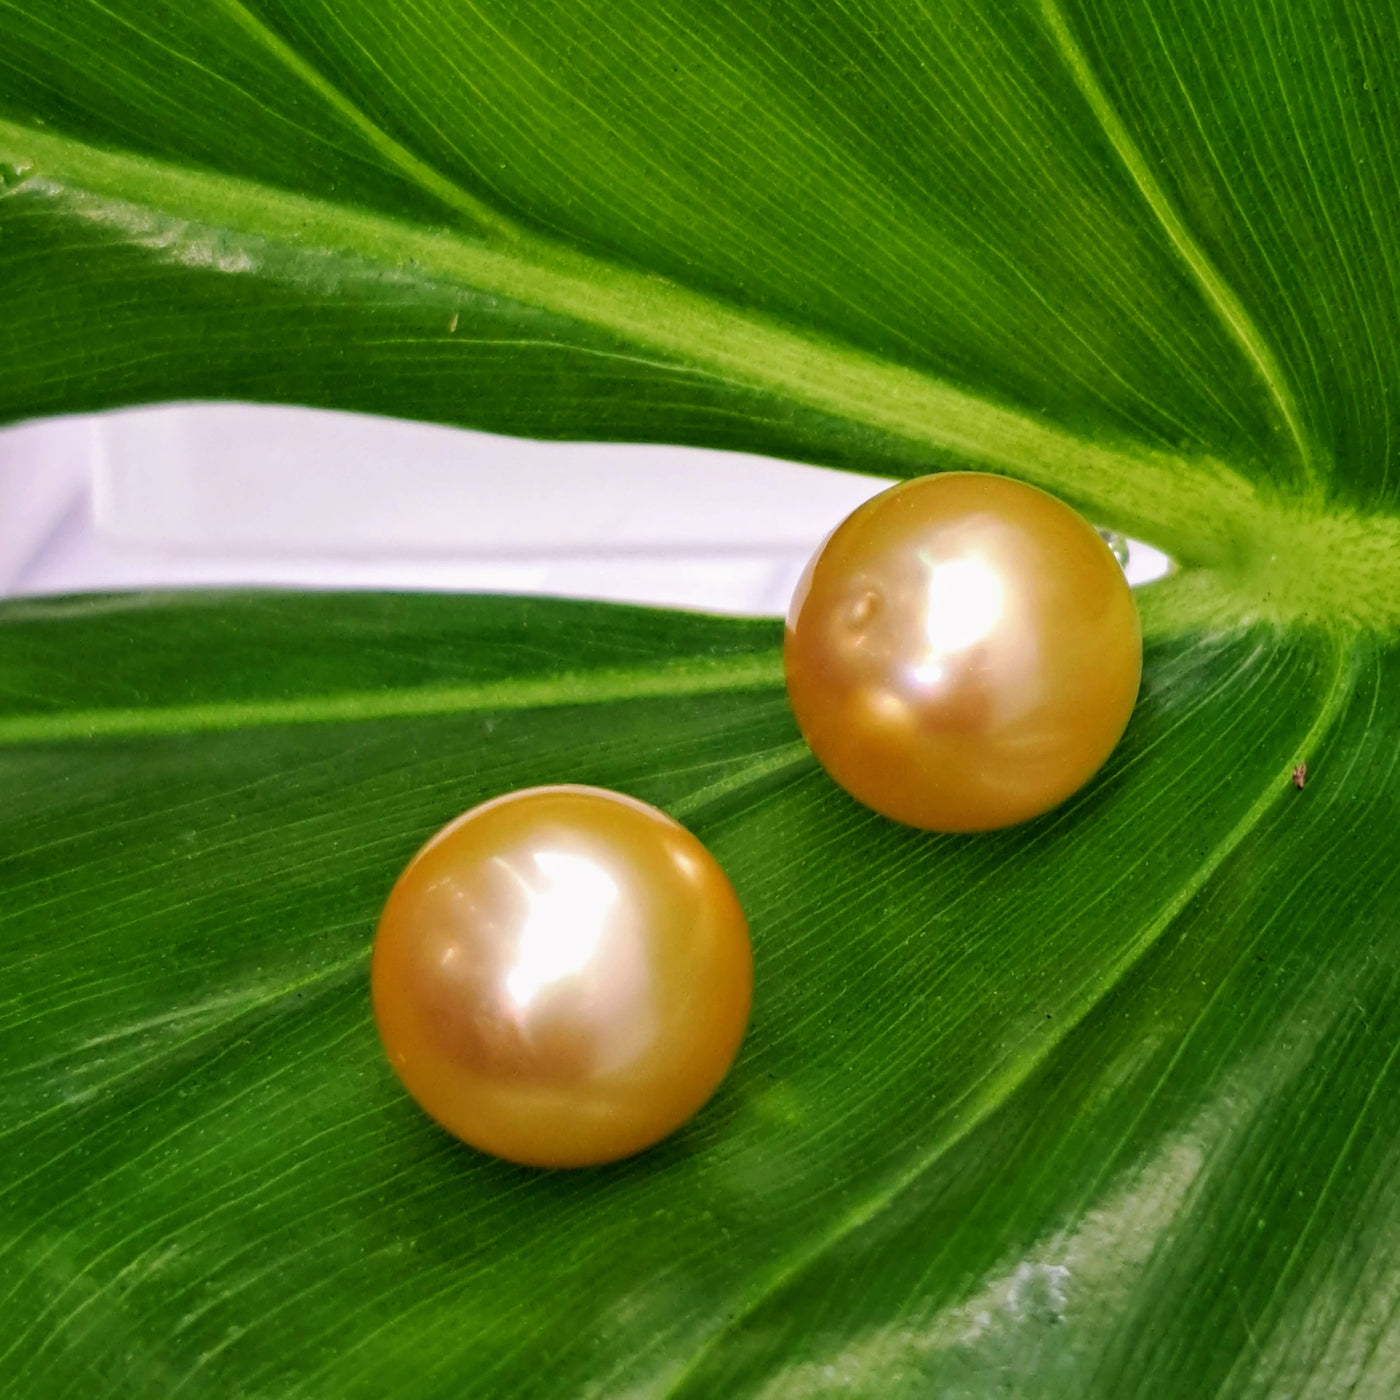 "Goldens" 13mm Stud Earrings - South Sea Golden Pearls, (Specialty Backs Included)